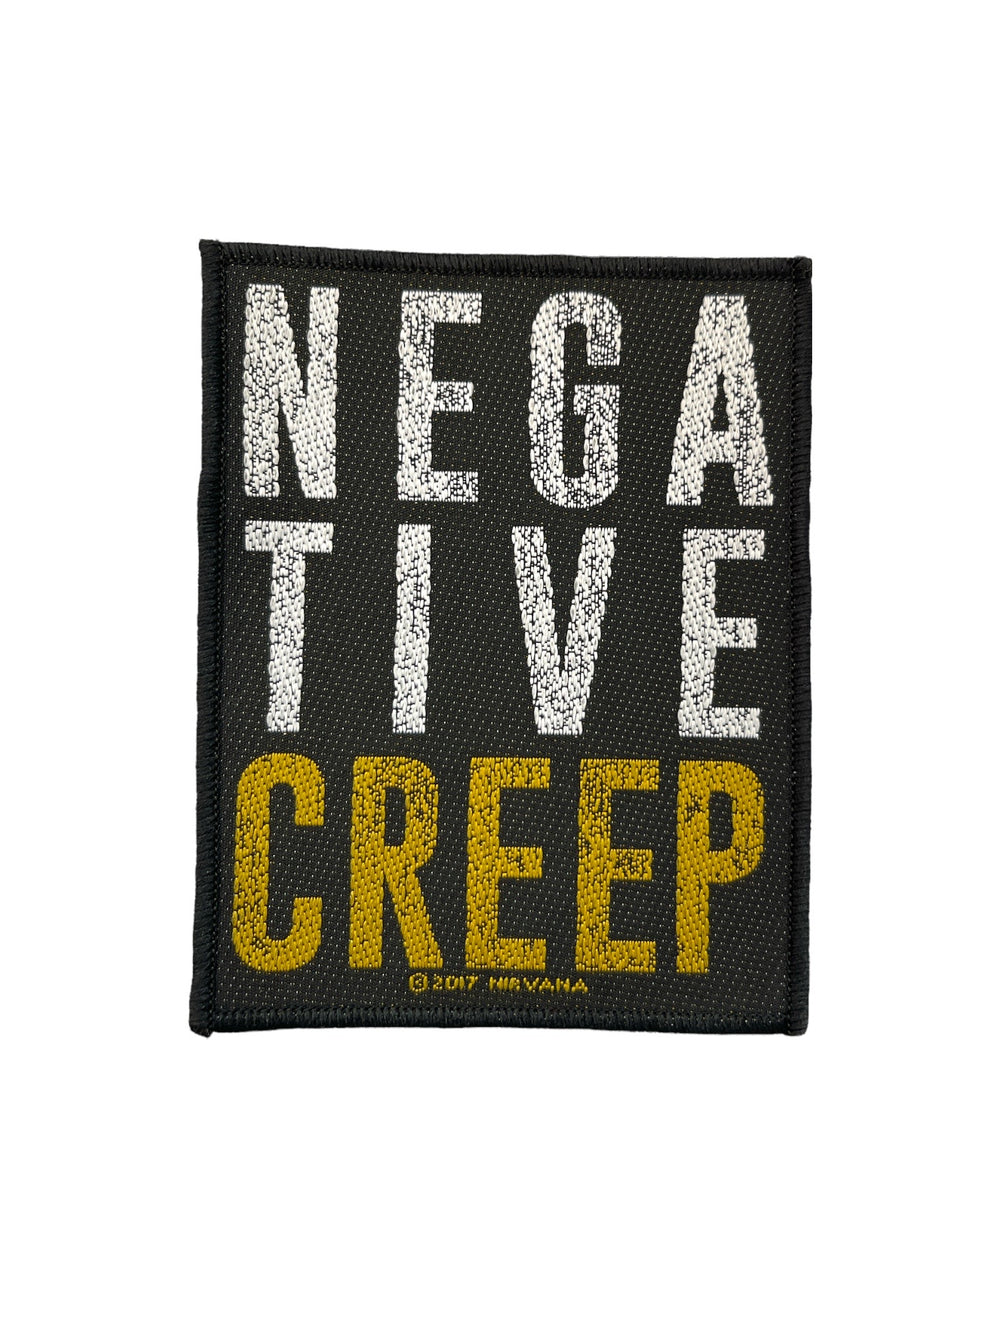 Nirvana Negative Creep Official Woven Patch Brand New Official